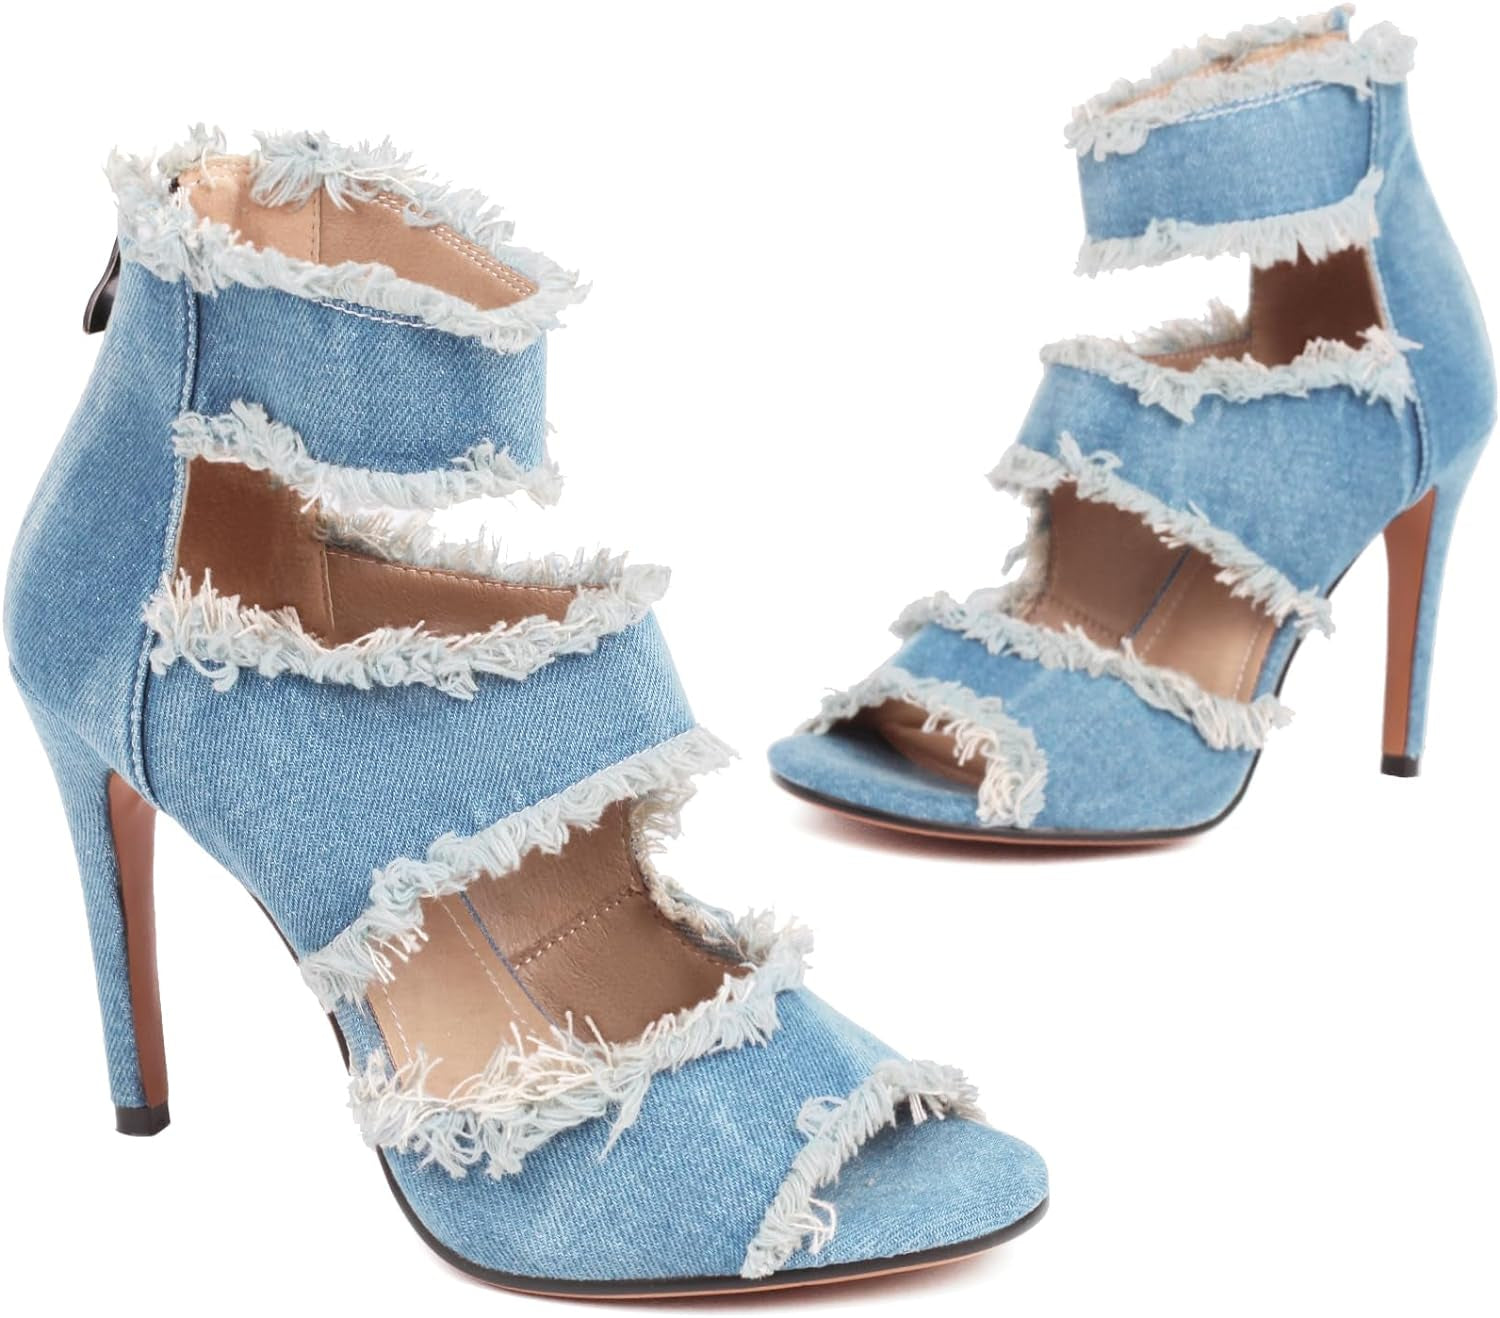 Chic Denim Peep Toe Heeled Sandals with Ankle Strap 